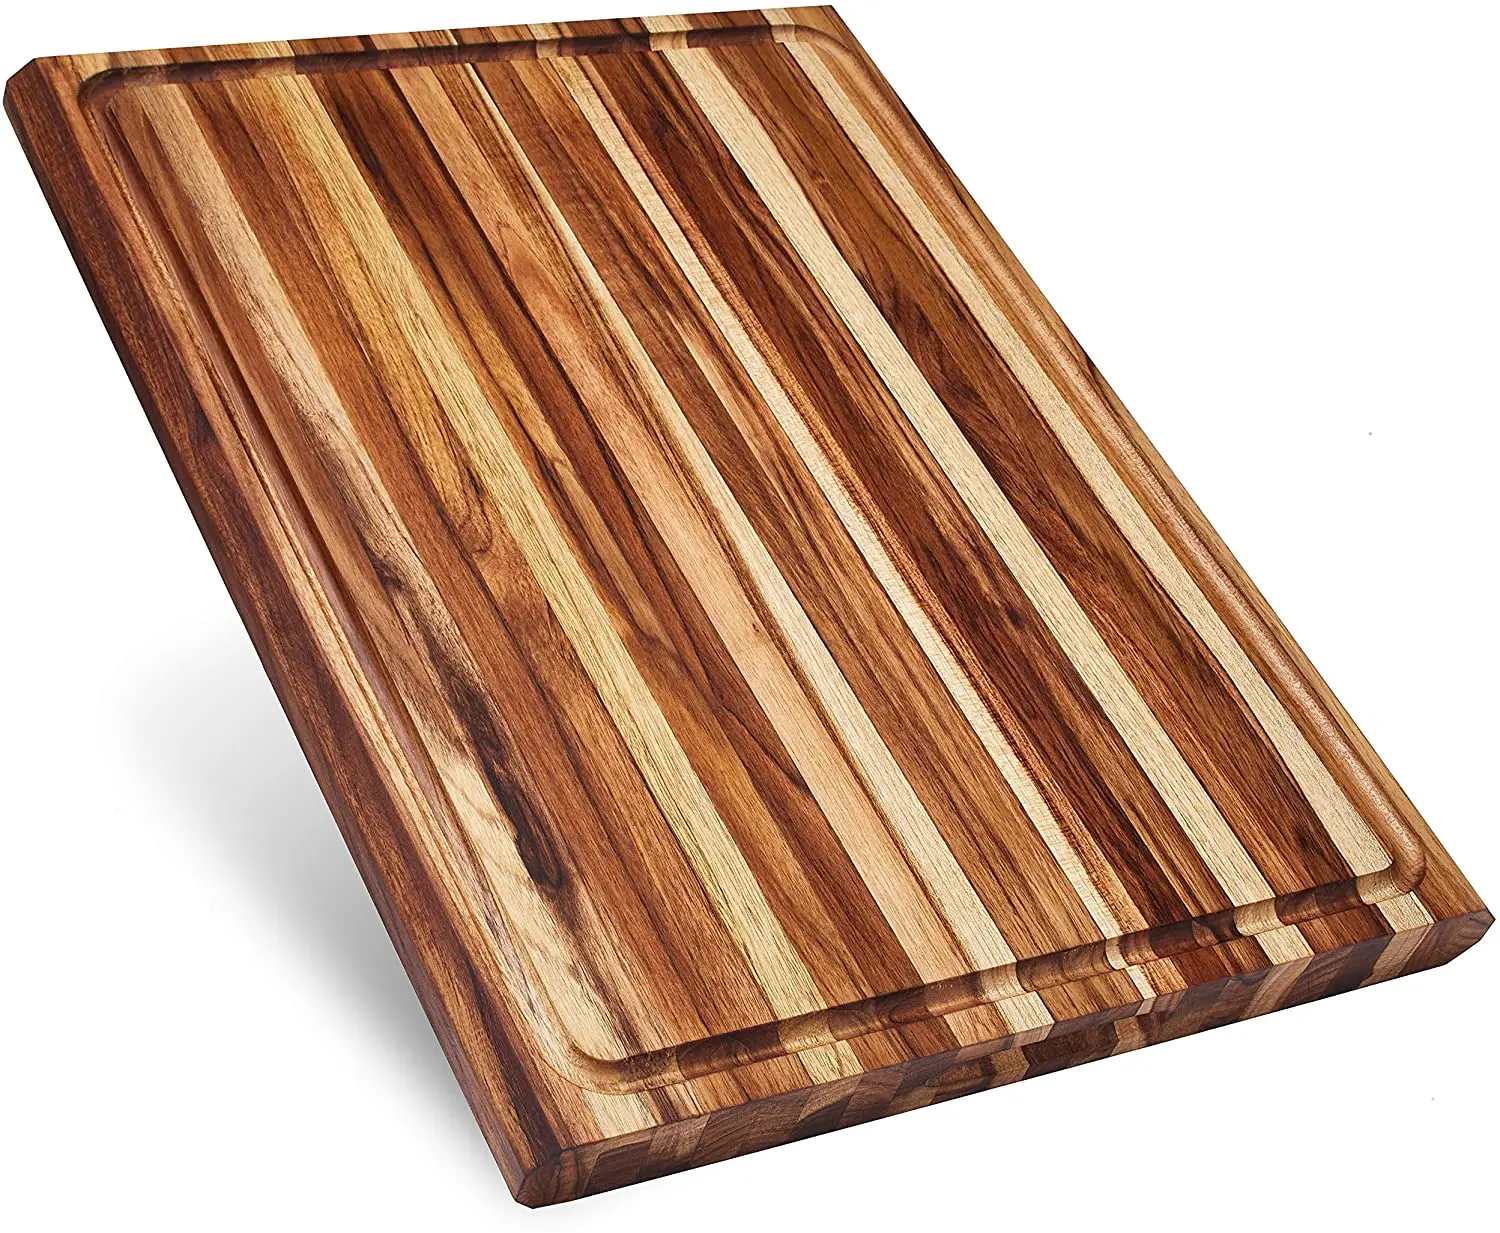 

XXL Thick Teak Wood Cutting Board with Juice Groove 23x17x1.5 in Large (Gift Box Included)